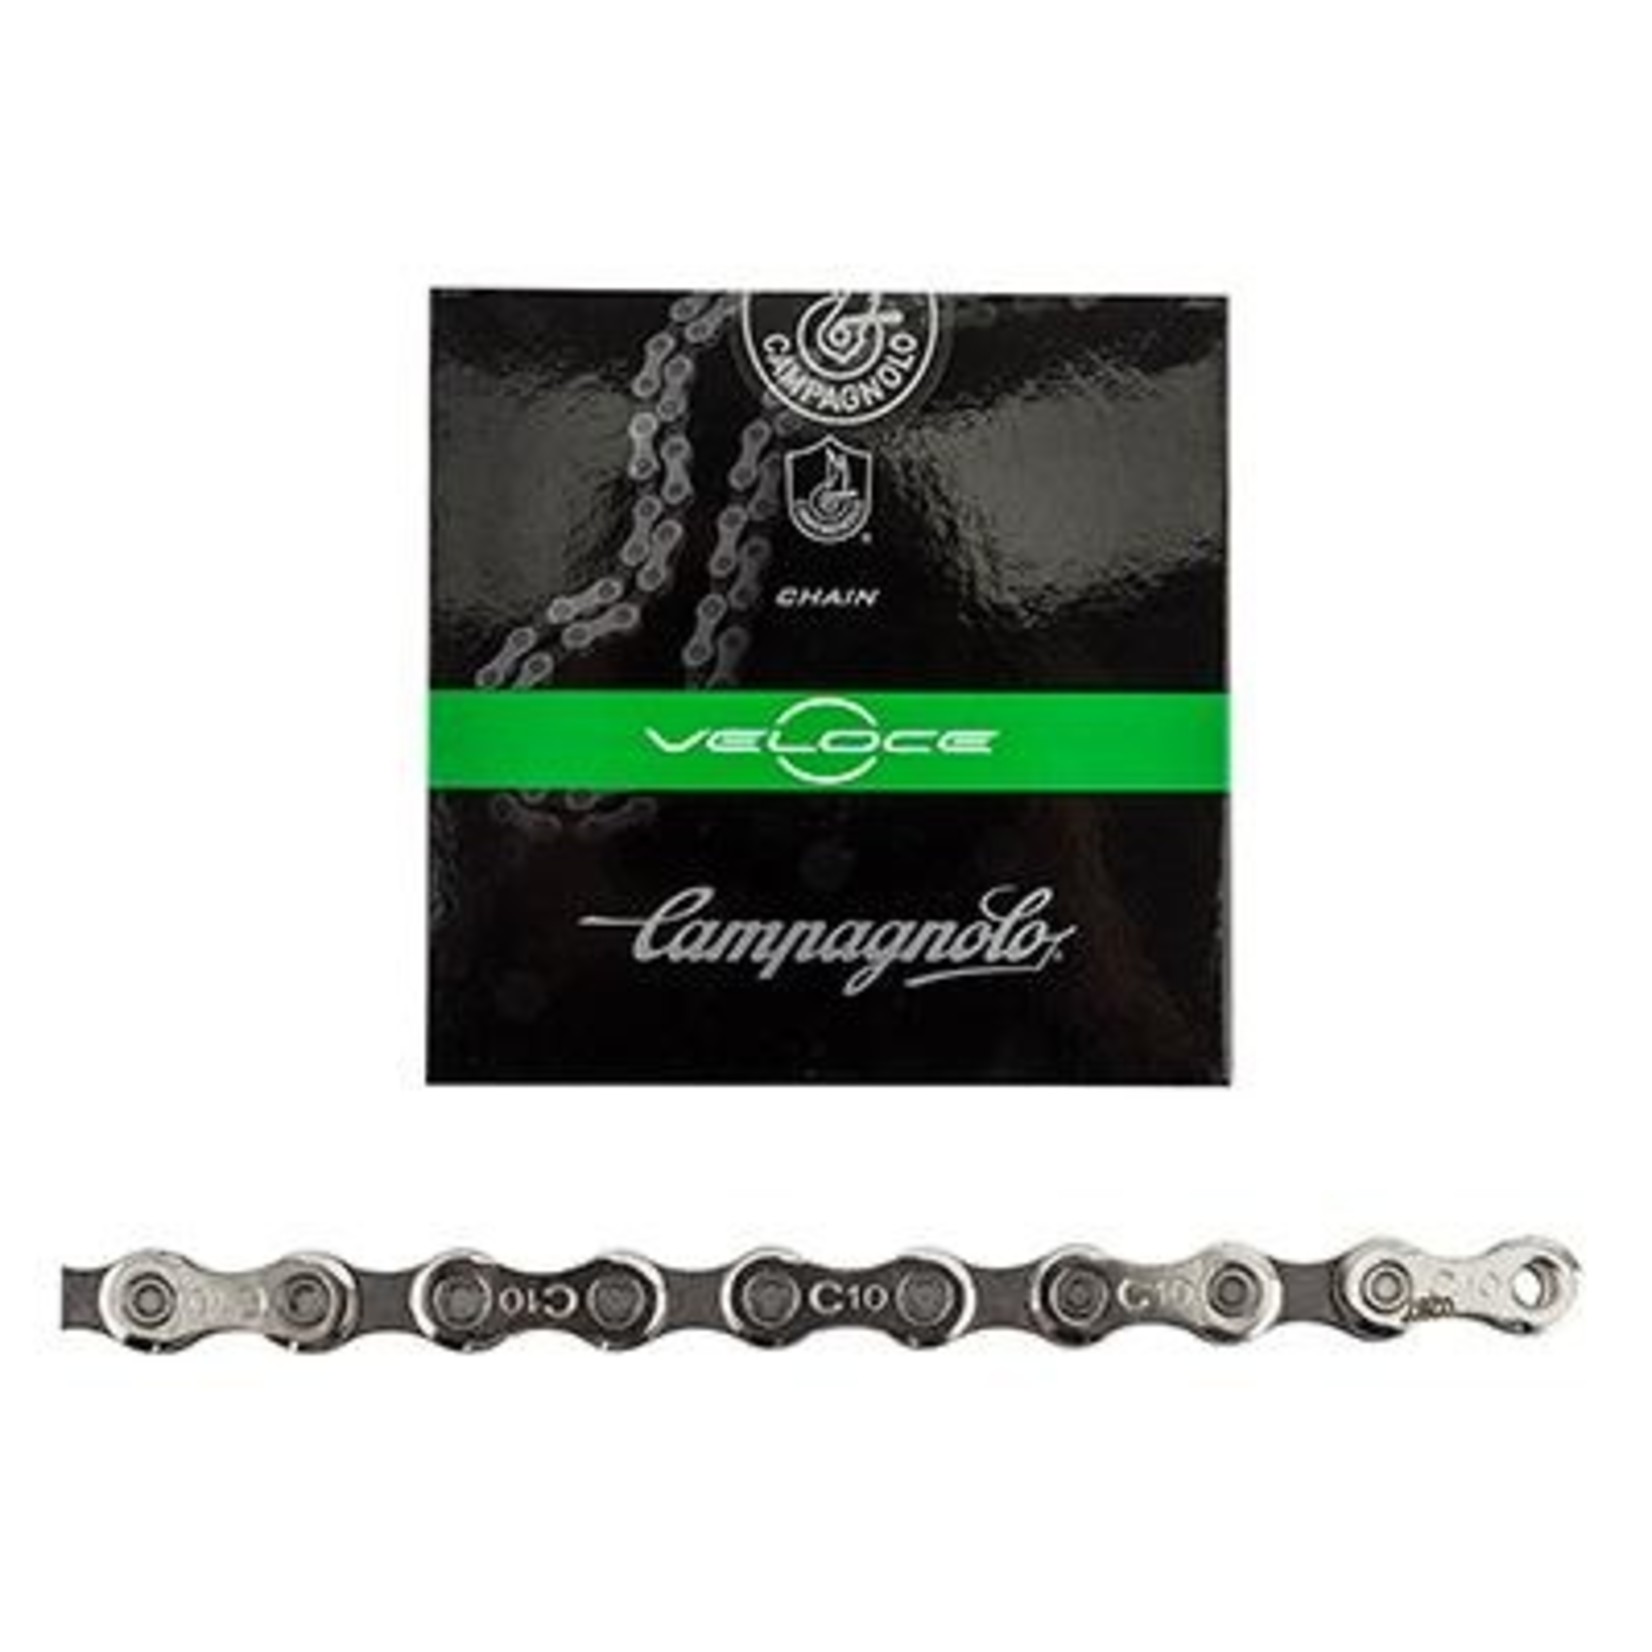 Campagnolo Campagnolo Veloce Chain - 10-Speed, 114 Links, Silver